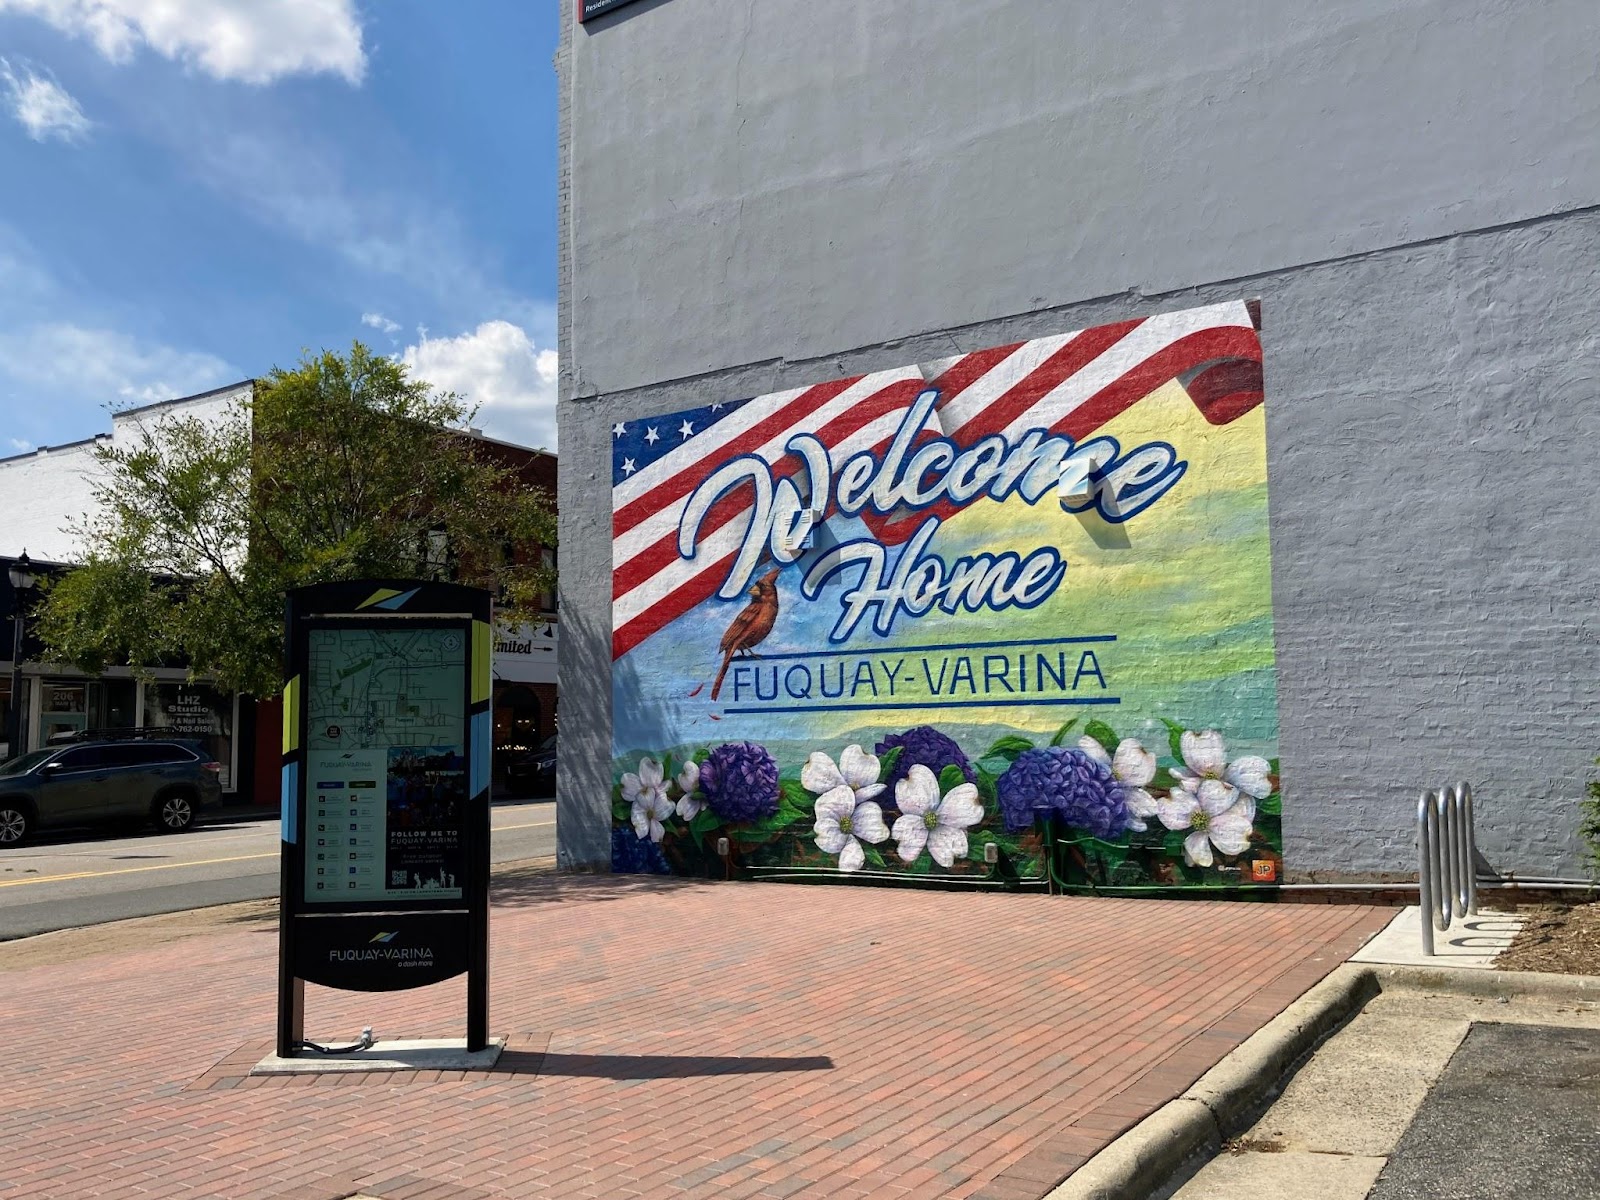 Public Art in Fuquay helps make living in Fuquay feel like small-town American.